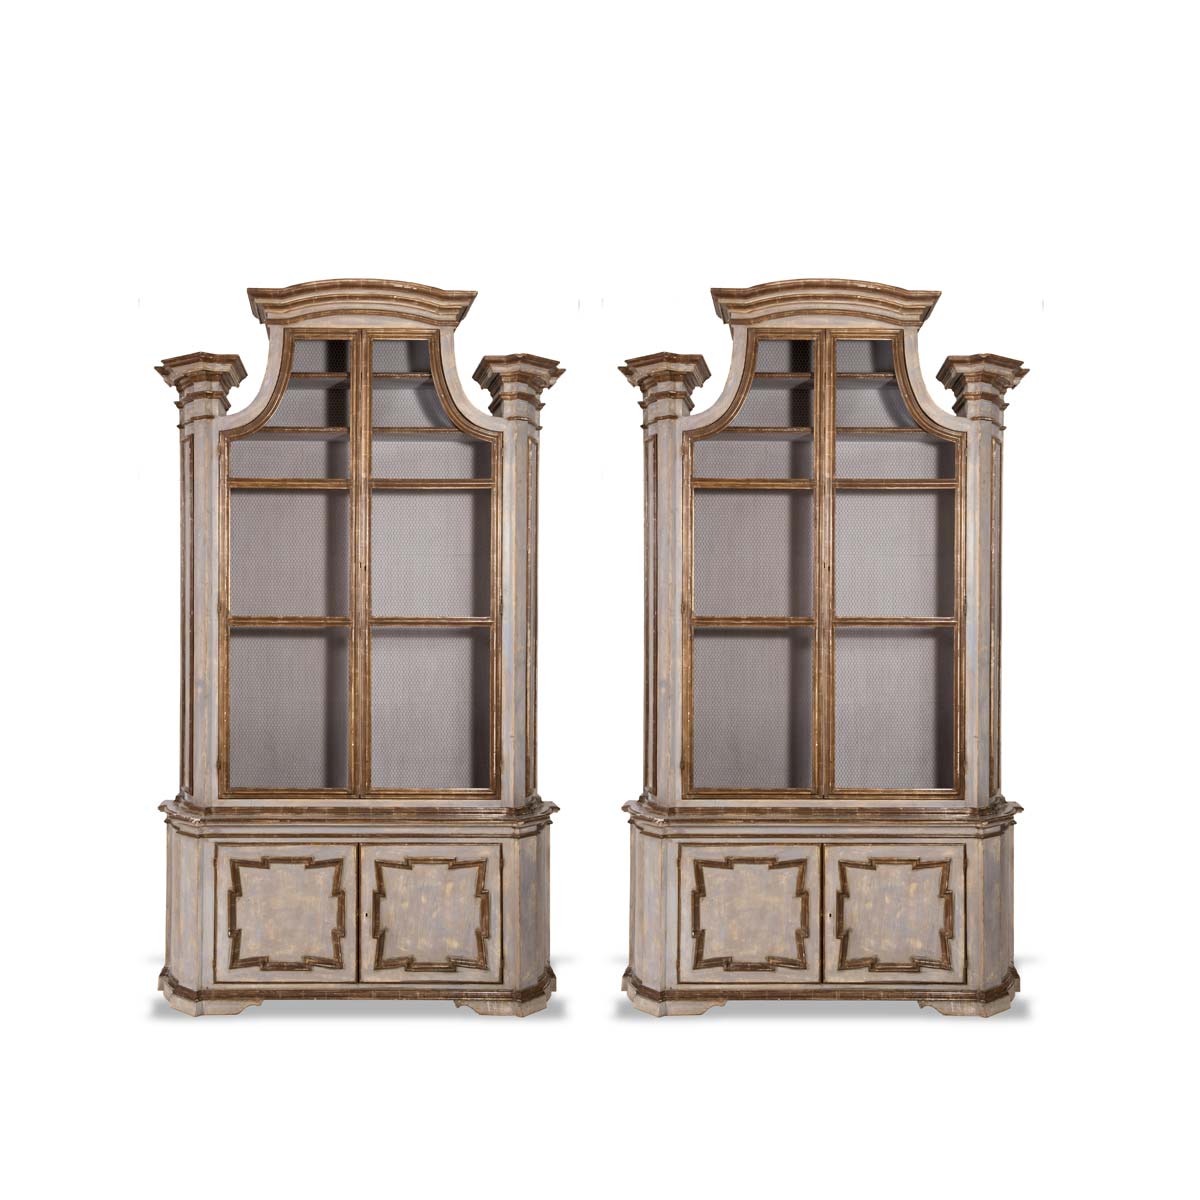 Pair of carved and lacquered bookcases, 20th Century.